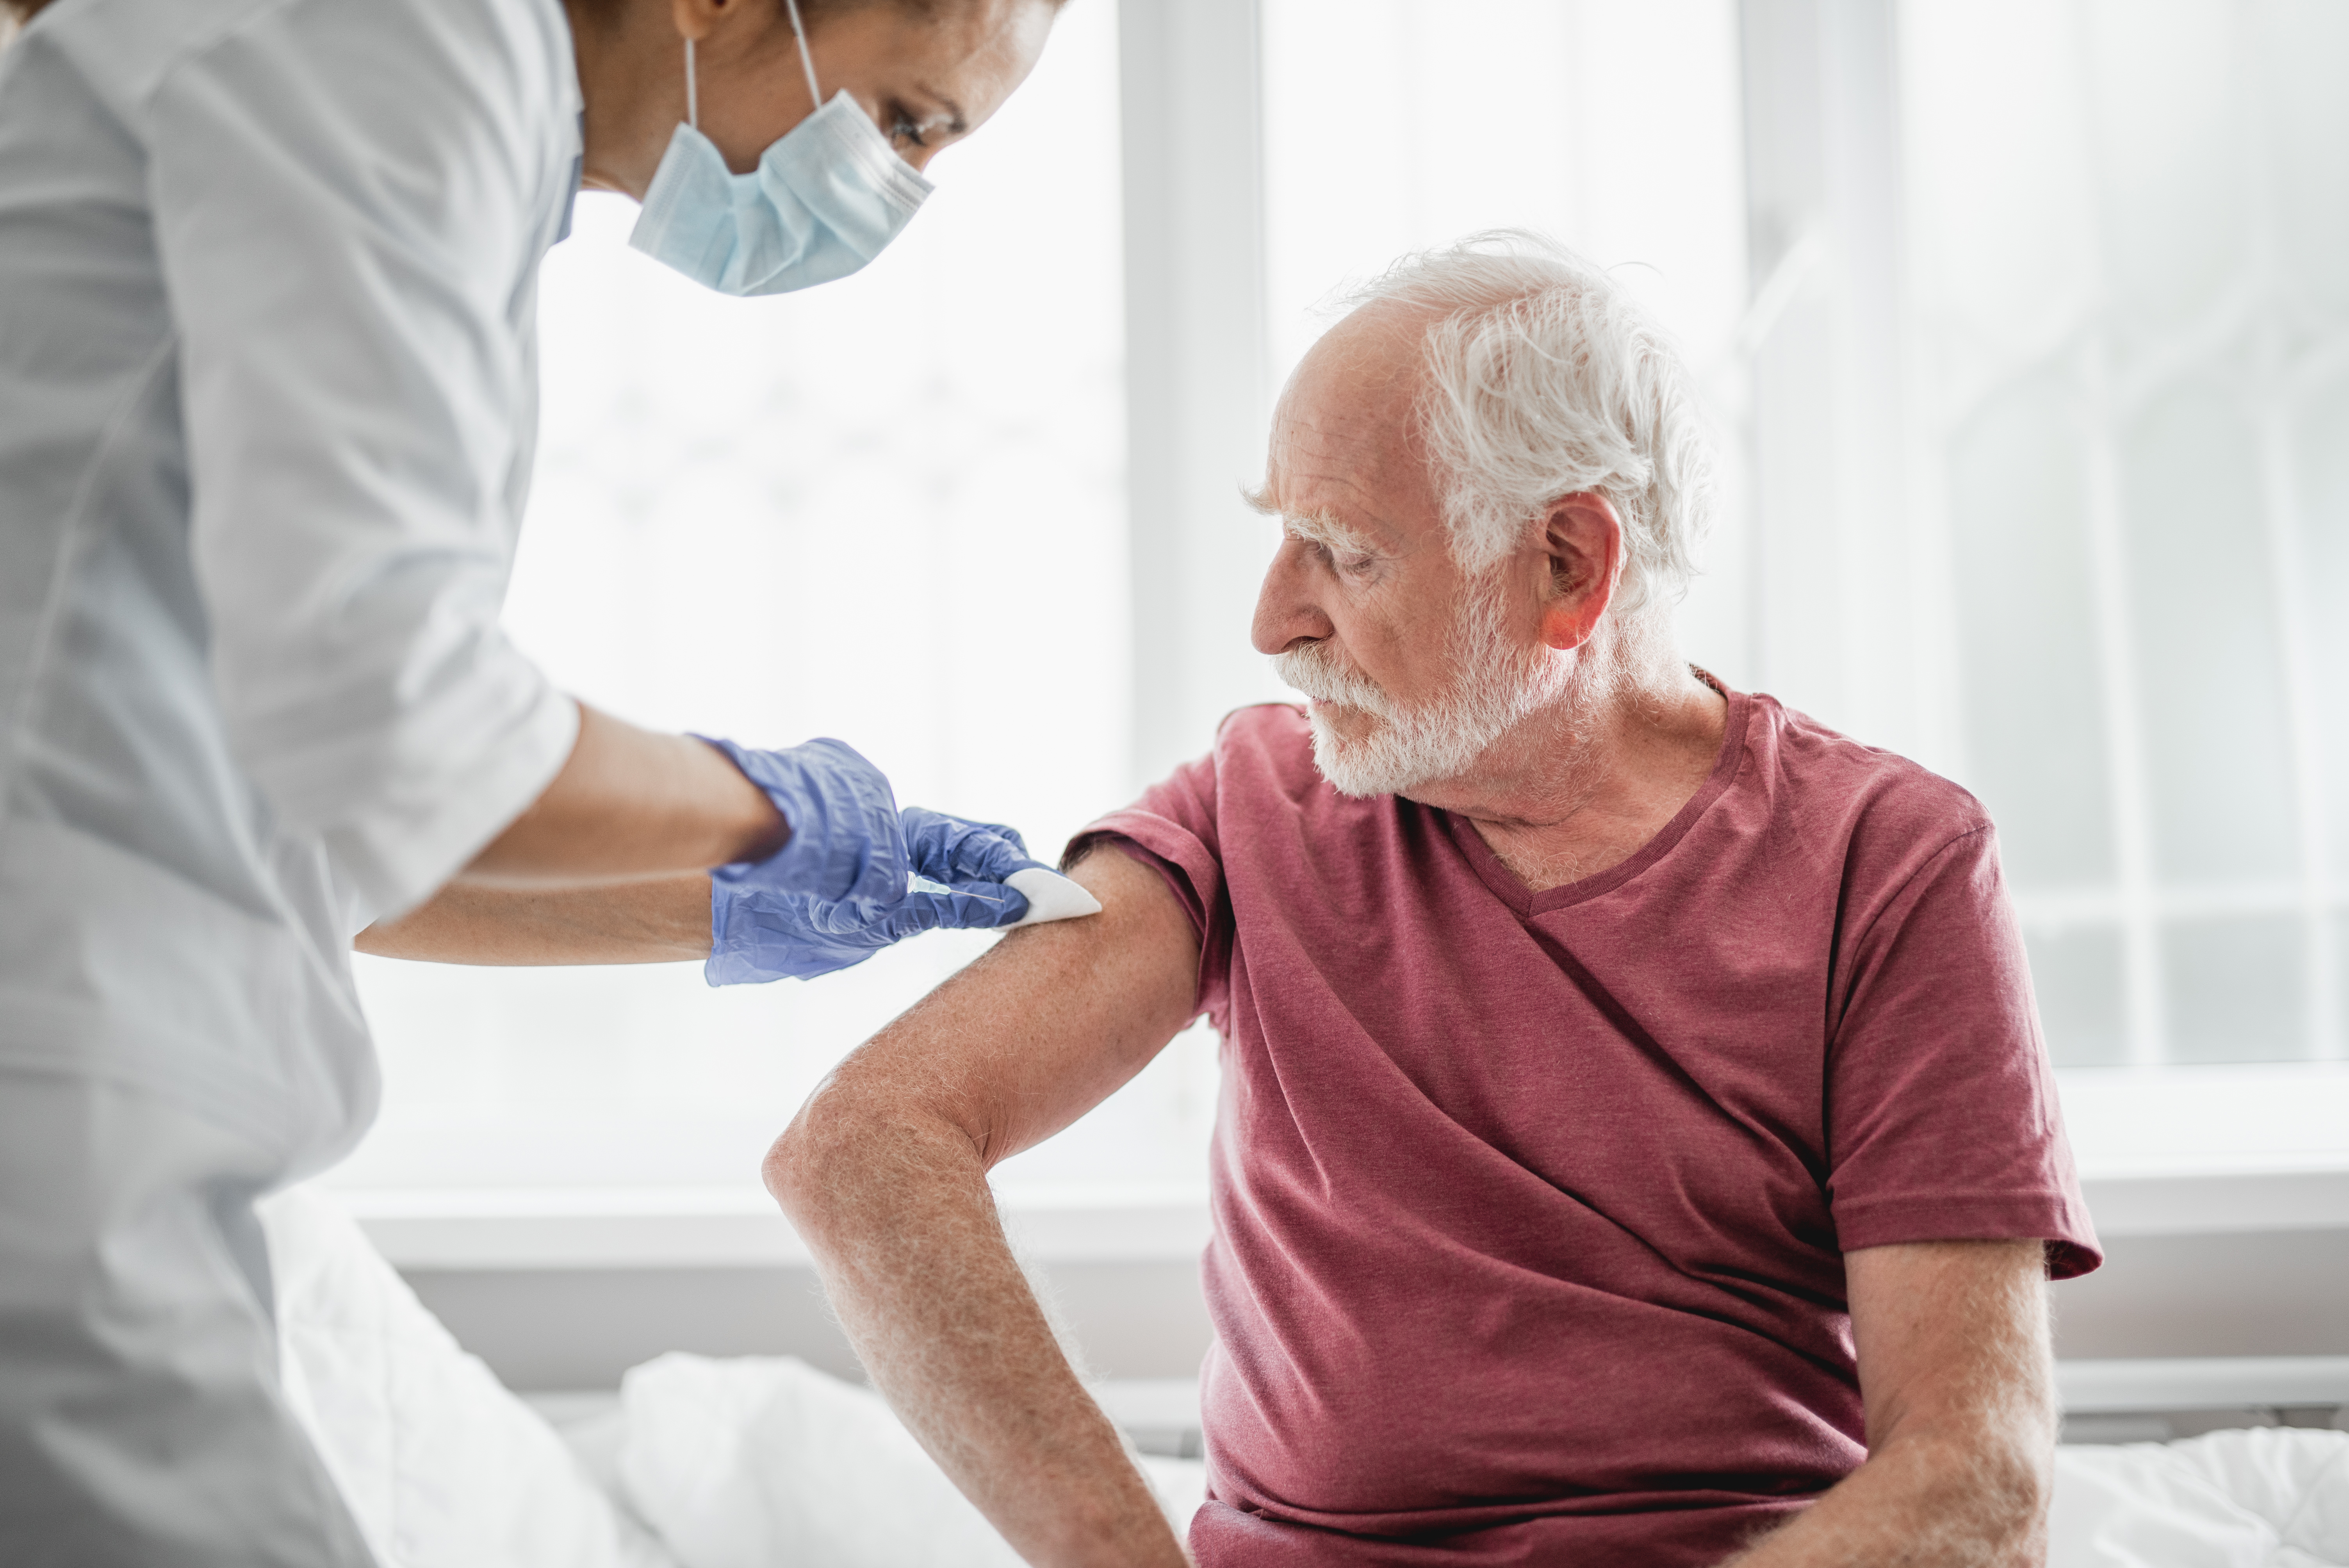 Image of older adult male receiving a vaccine from a health care worker.